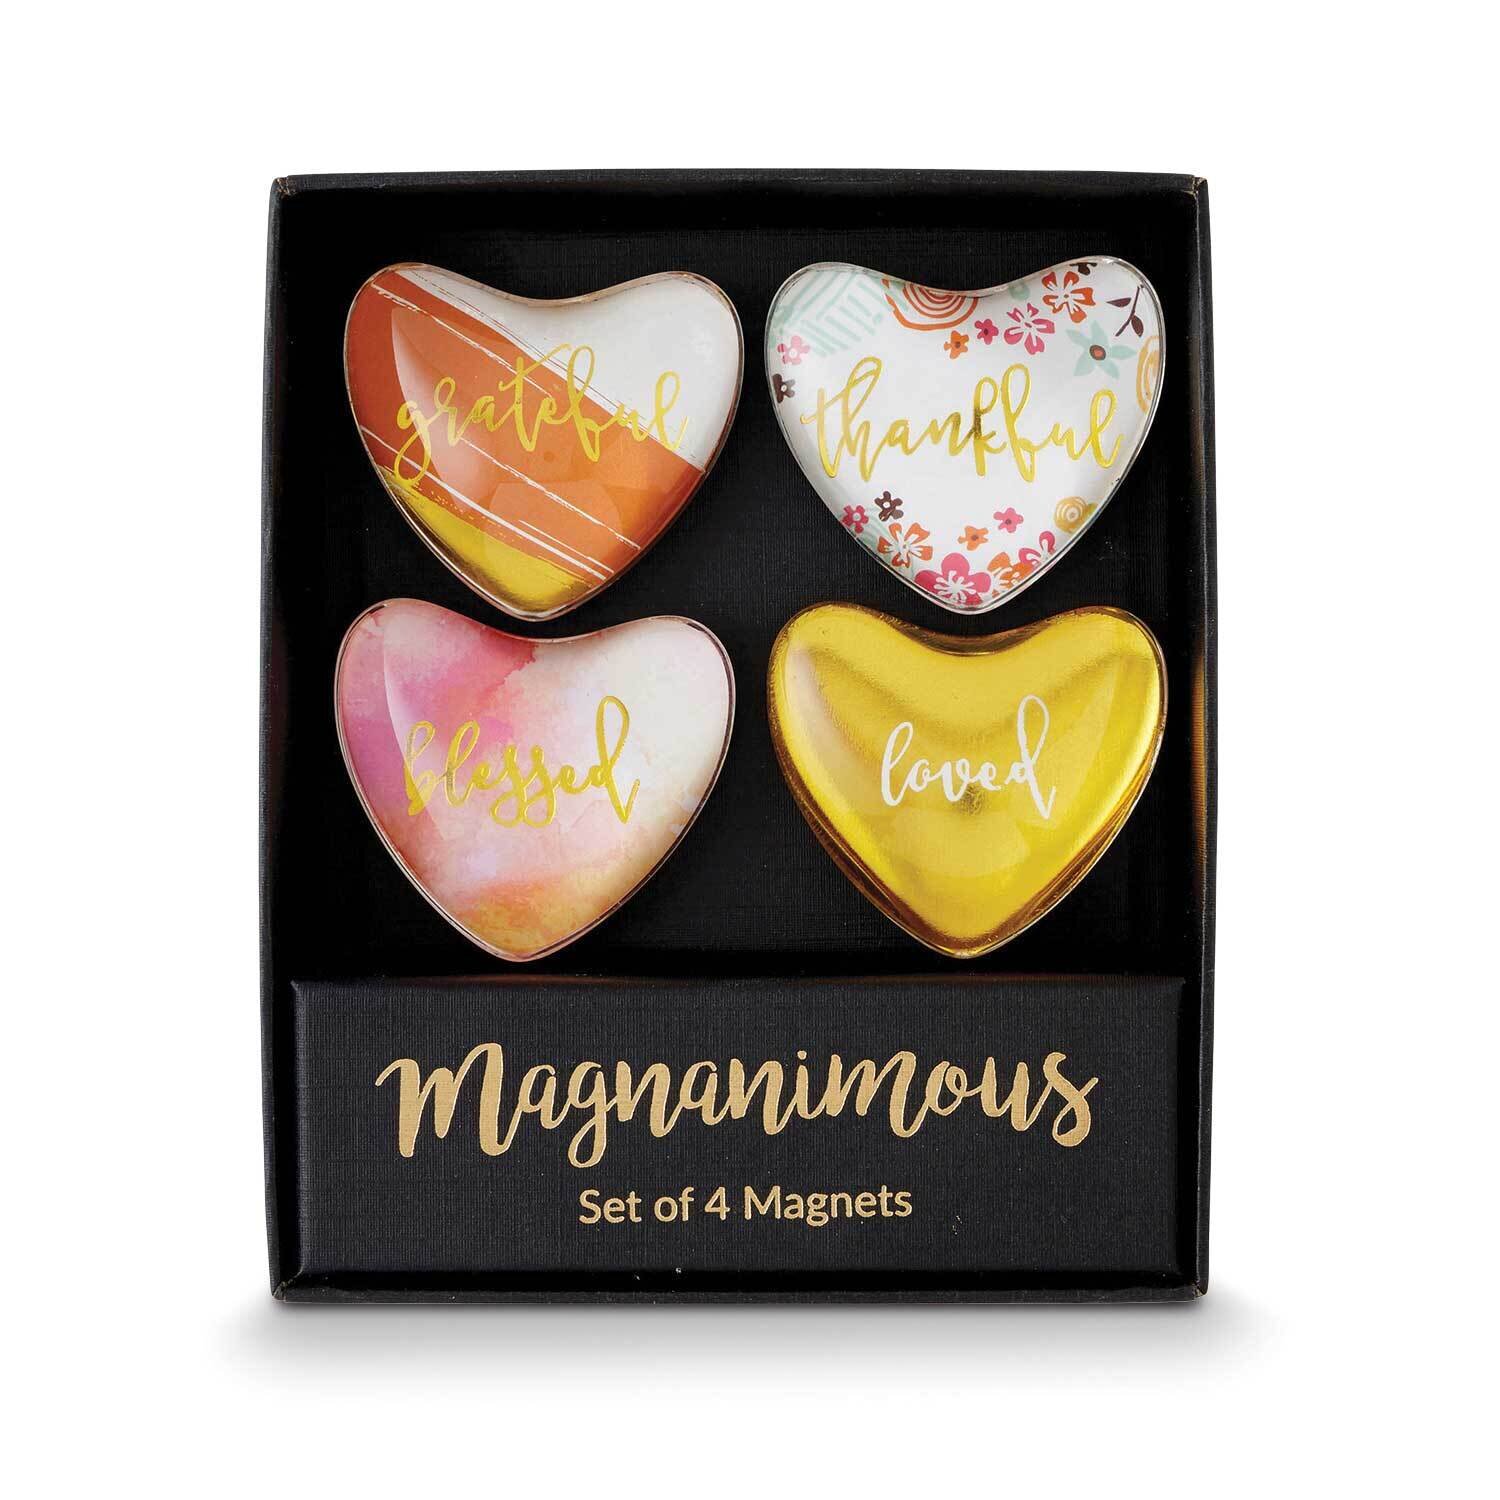 Magnet Gift Set GREATFUL, THANKFUL, BLESSED GM23097